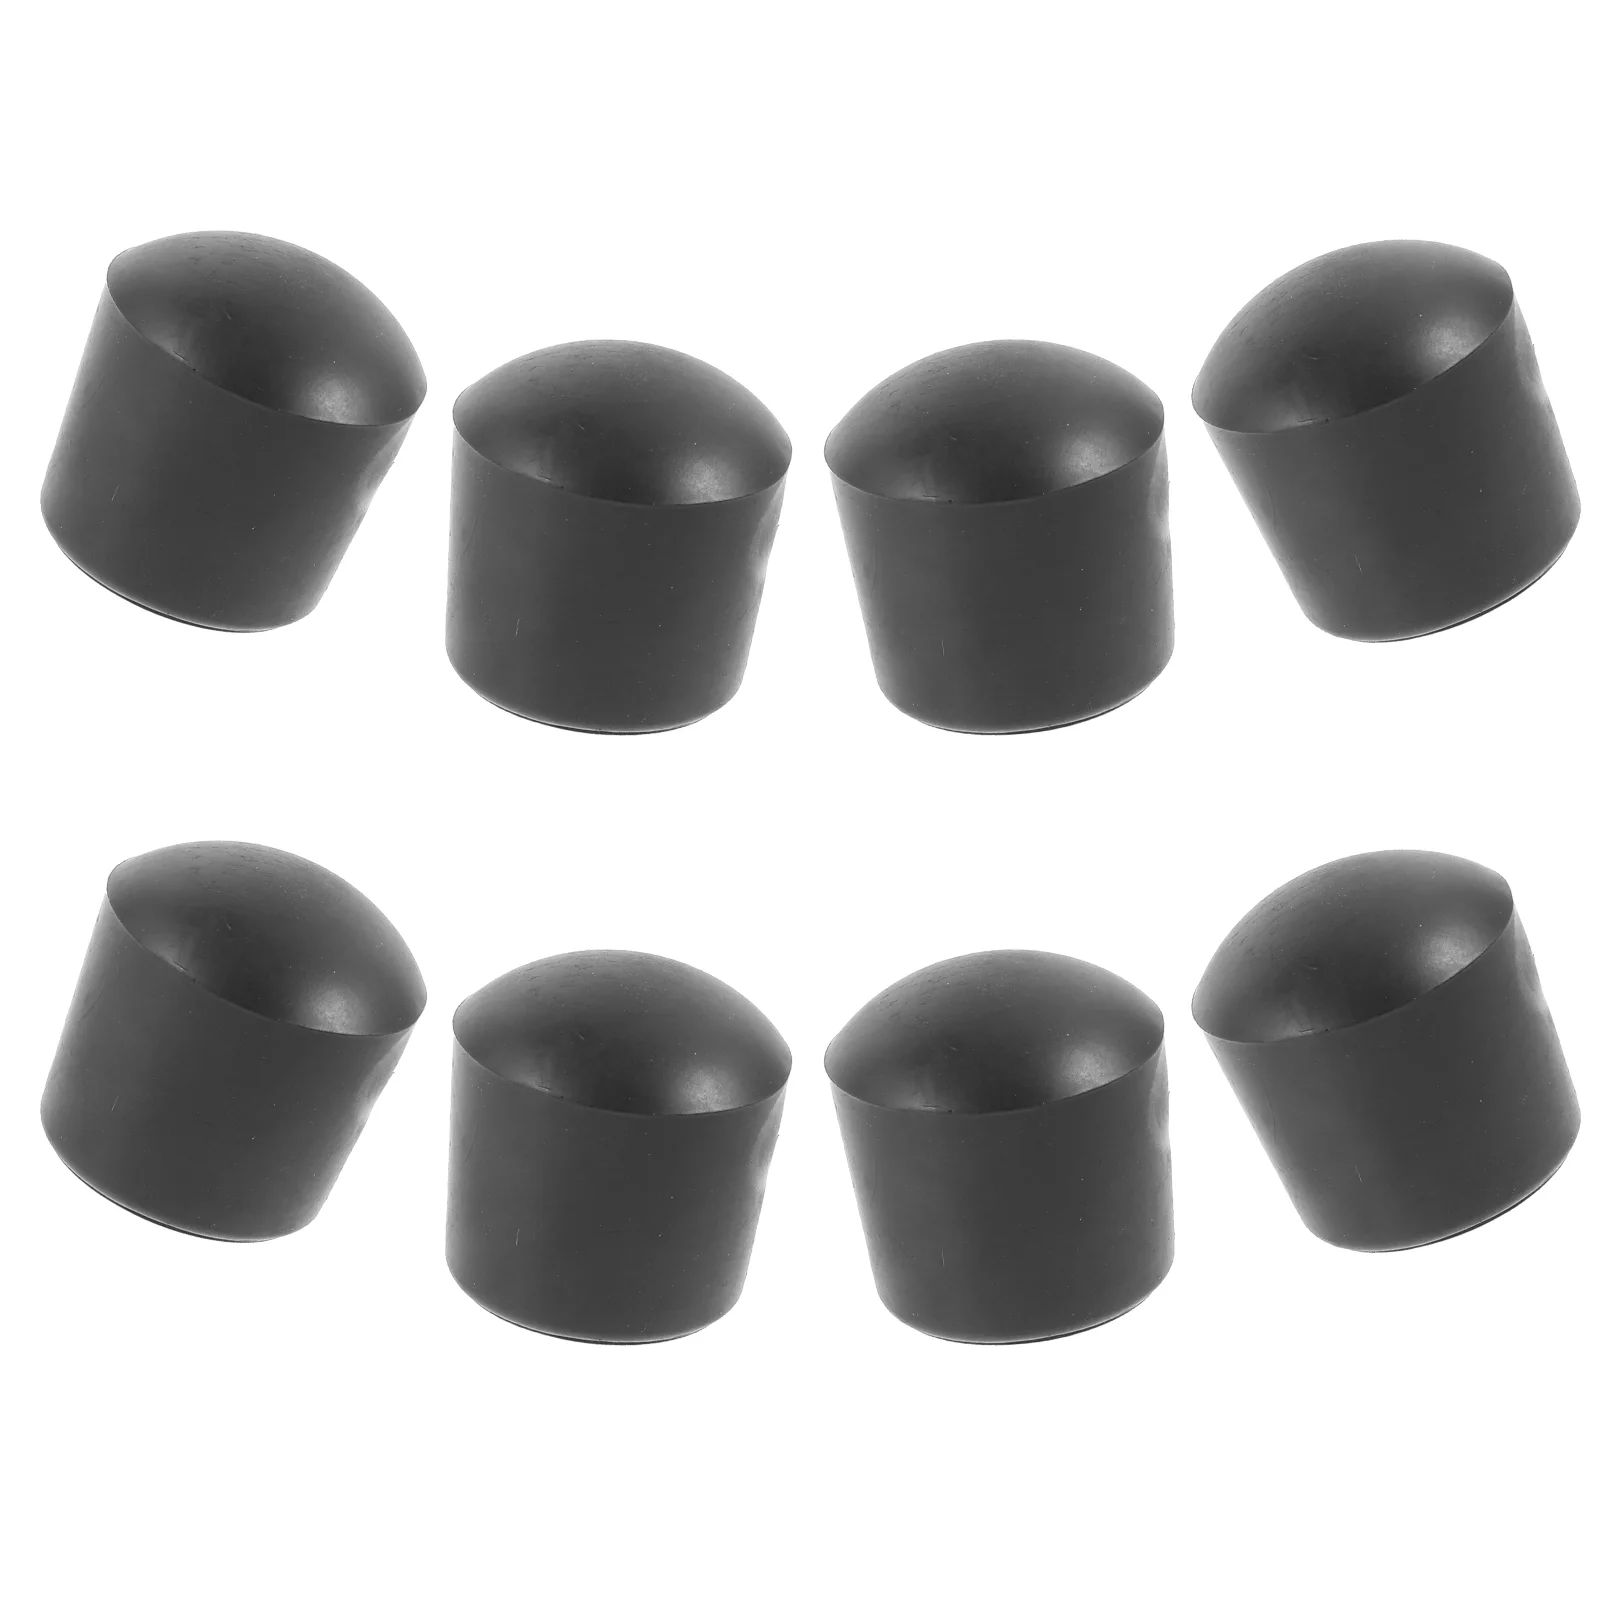 8pcs Foosball Safety End Caps Post Cover Football Table Tip Protectors